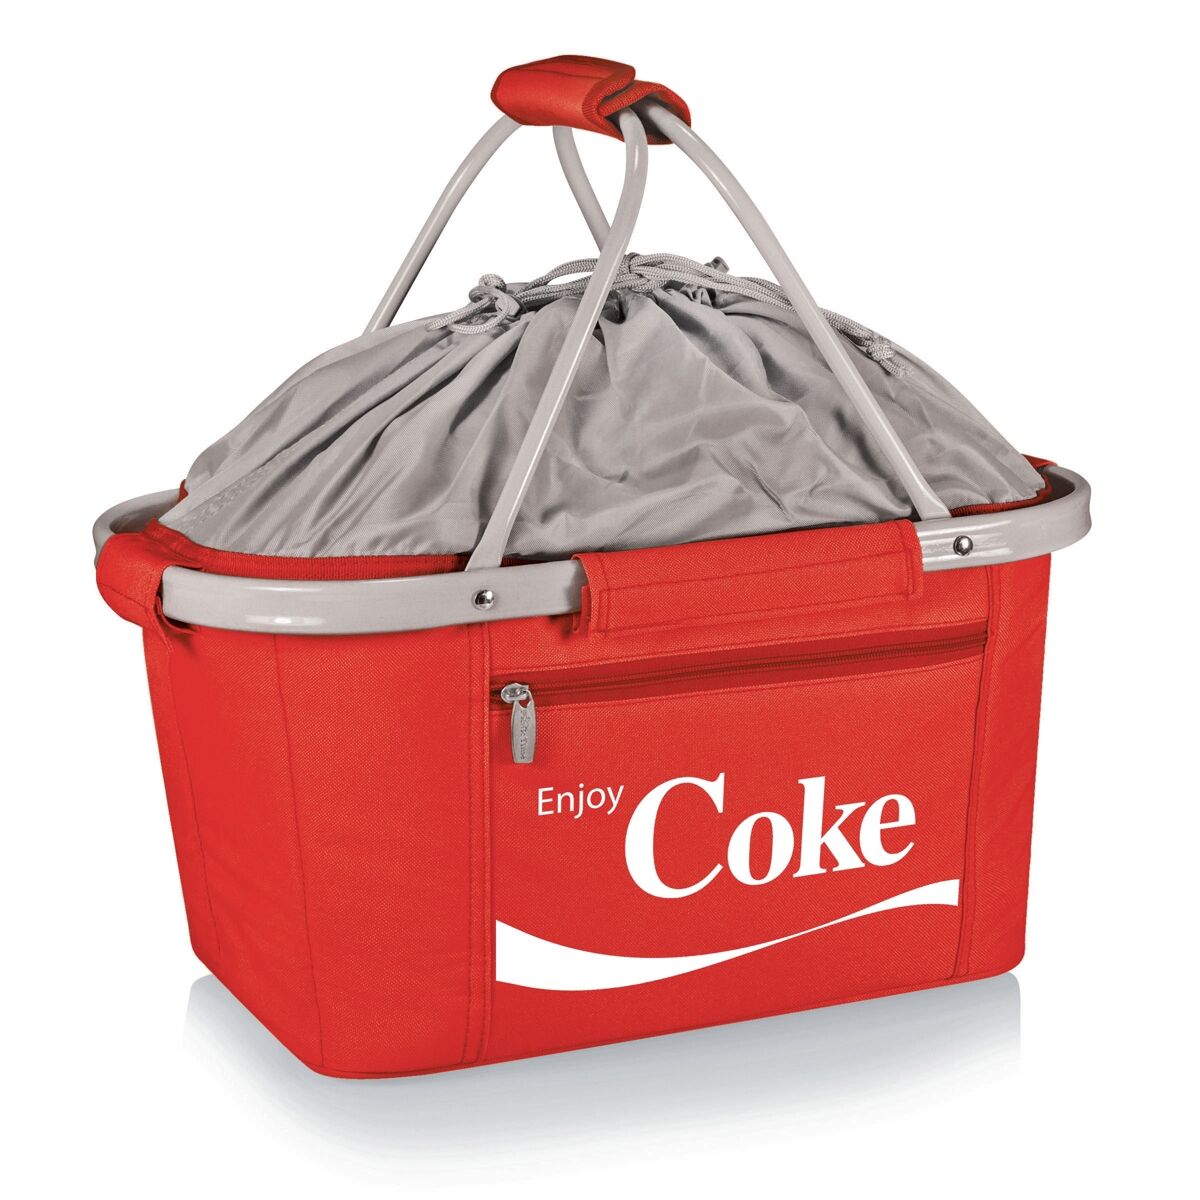 Oniva by Picnic Time Coca-Cola Metro Basket Collapsible Tote - Red